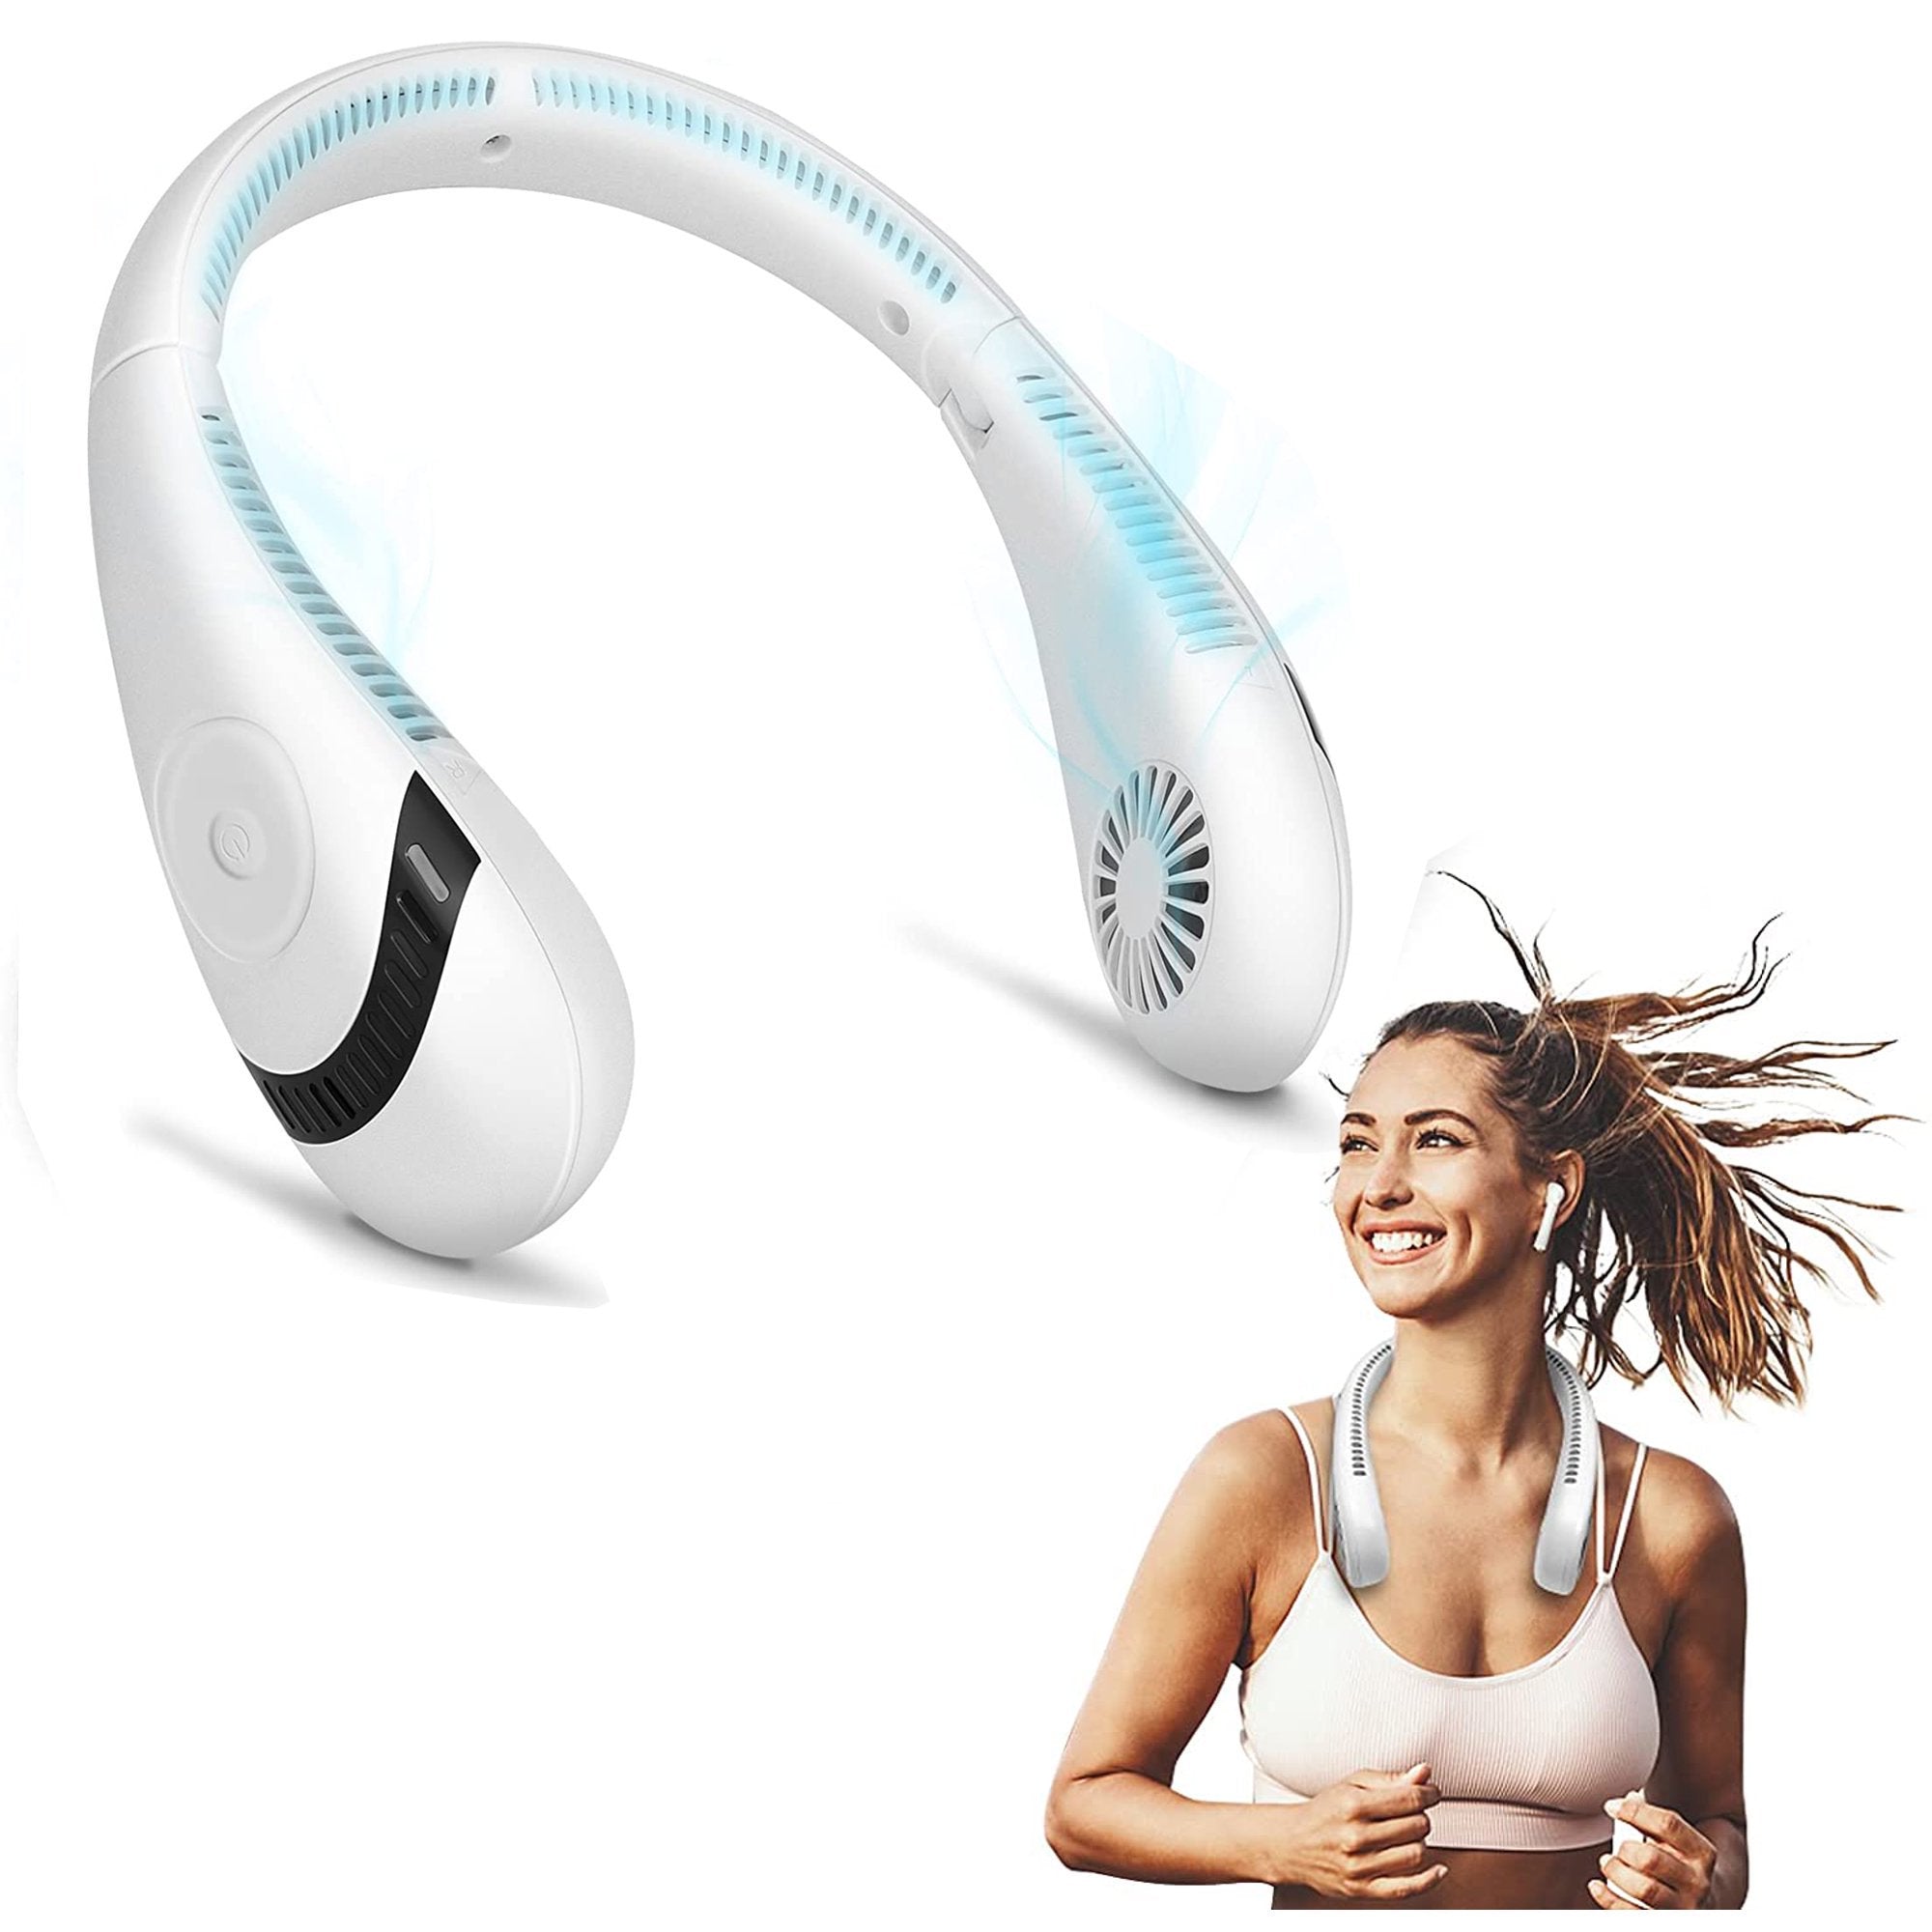 Portable Neck Fan, Wearable Personal Fan, 4000mAh Battery Powered USB Rechargeable Bladeless Hands Free Neck Fan with 3 Speeds for Both Outdoor Indoor Use, White